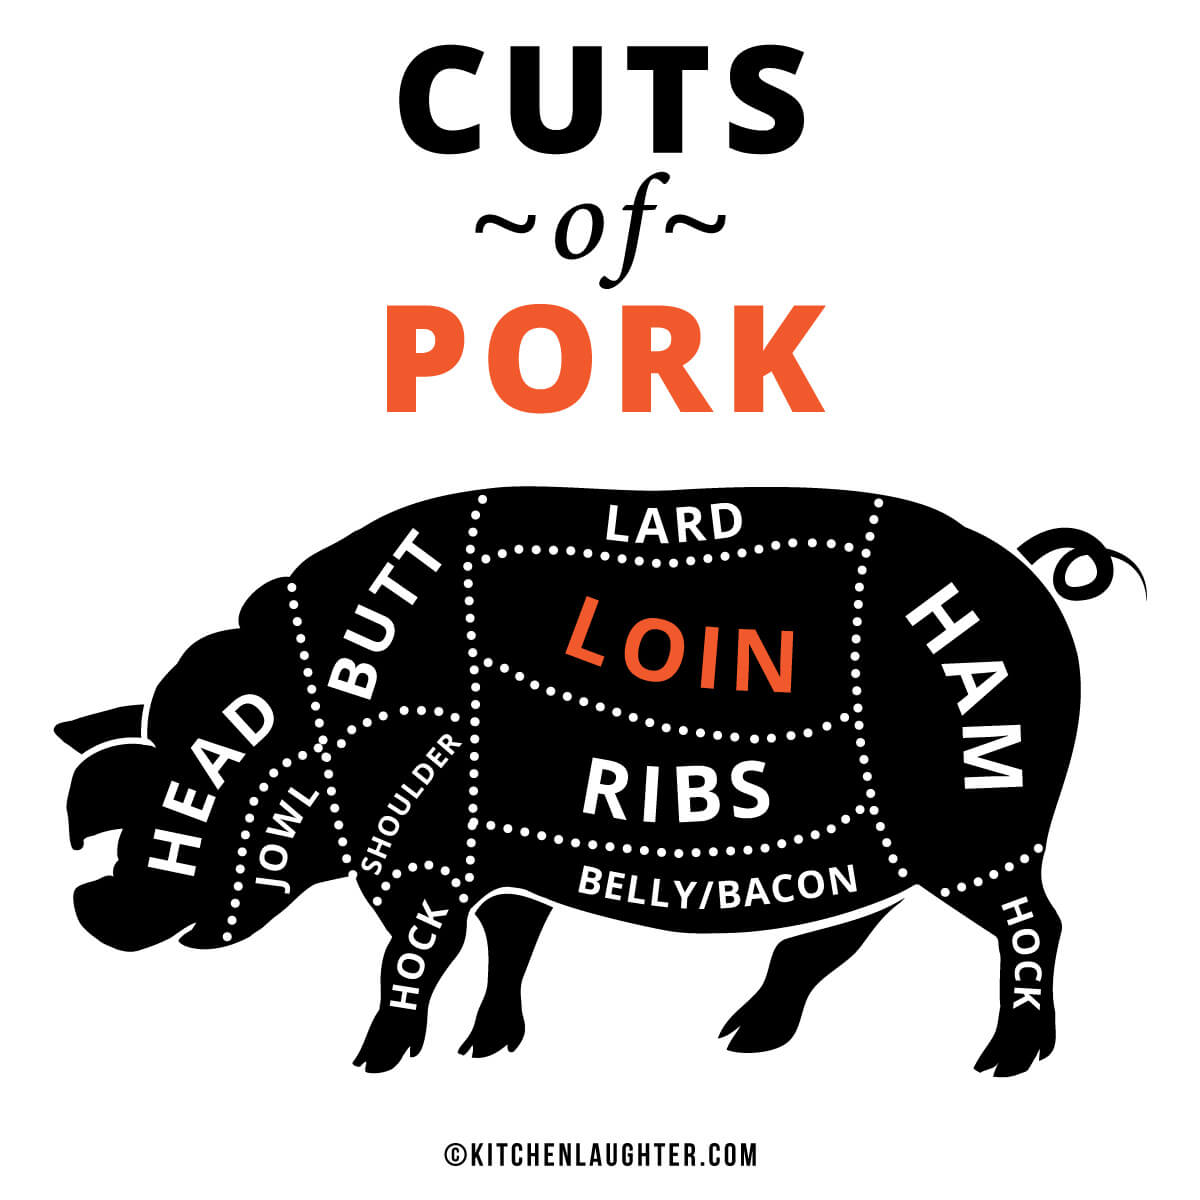 Pork graphic showing different meat cuts with the loin primal cut highlighted and text.